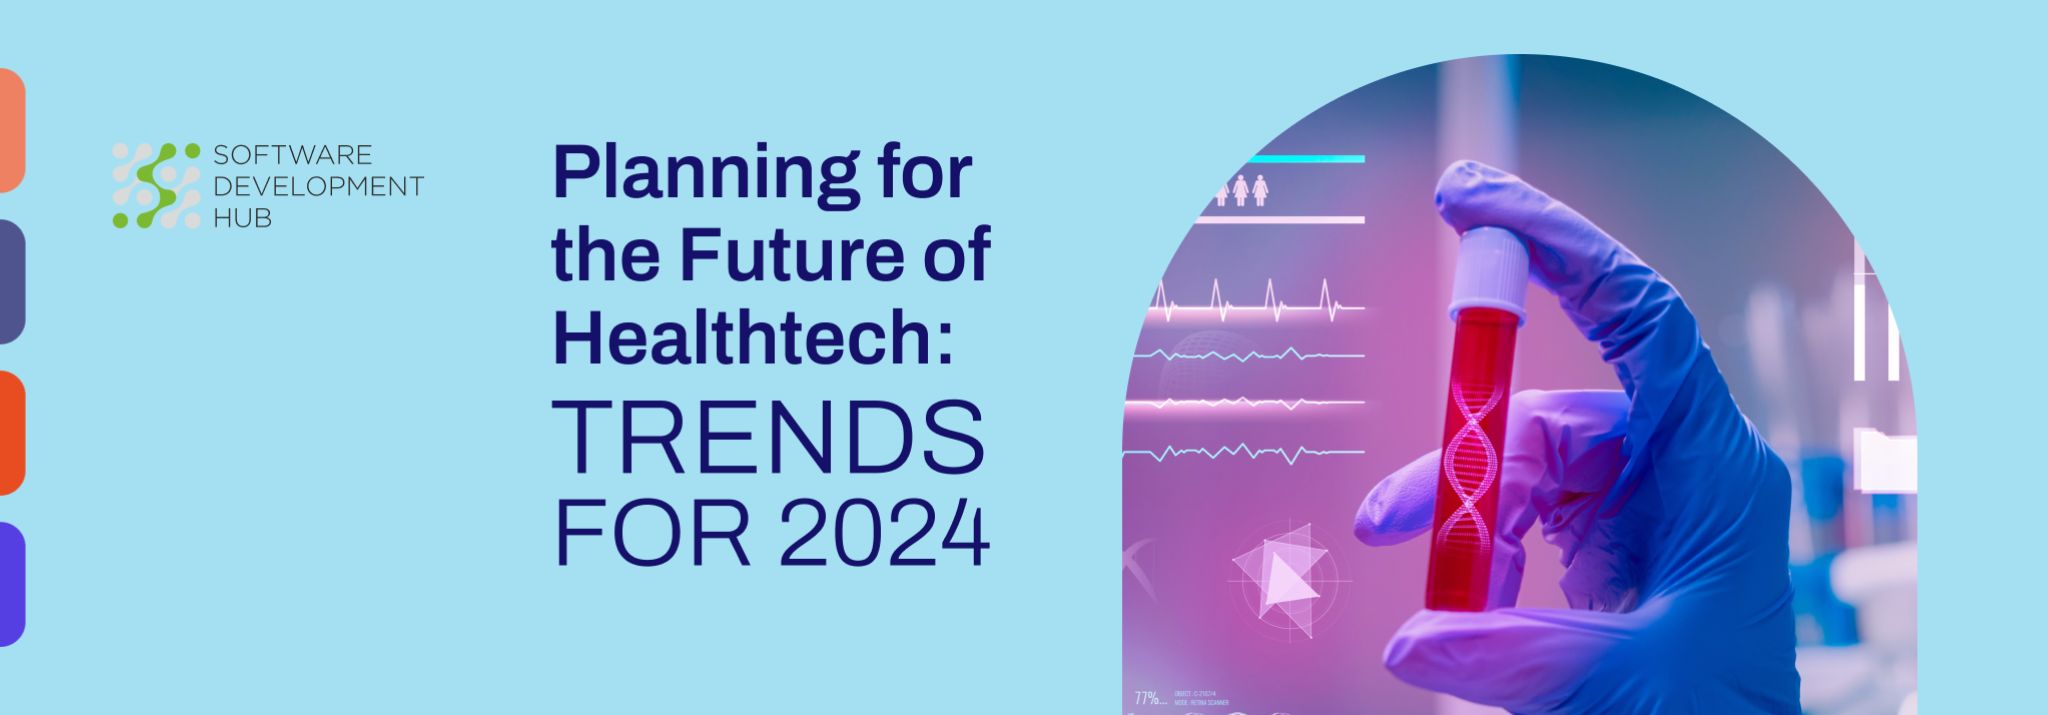 Planning for the Future of HealthTech: Top Trends in 2024